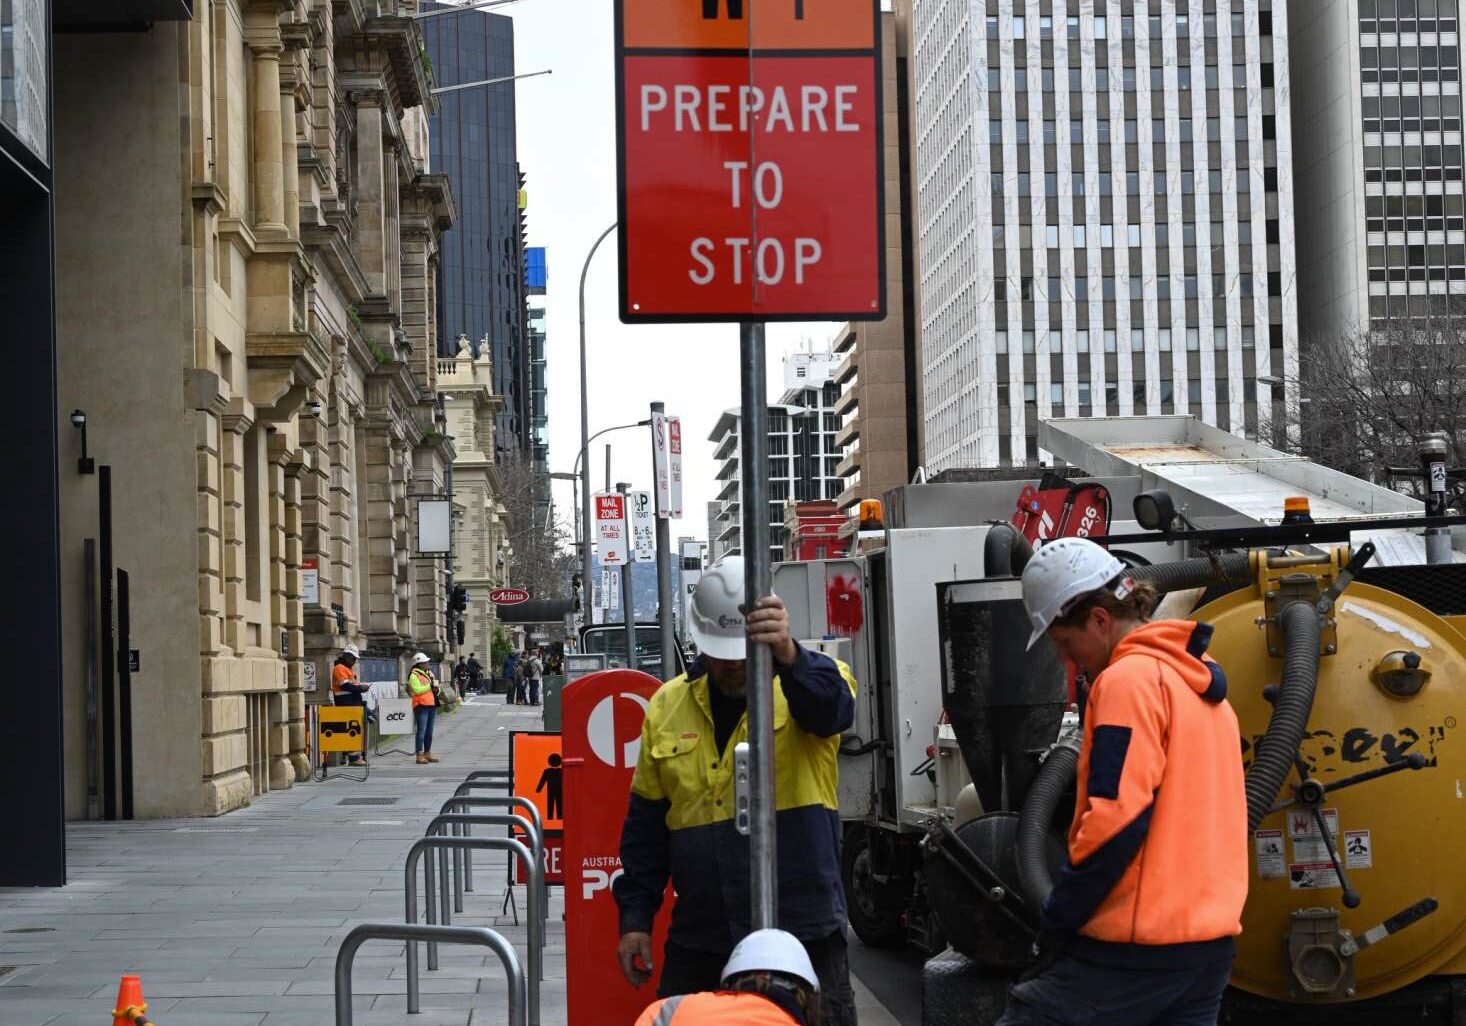 Seychell Traffic - Traffic Management Solutions Adelaide Traffic Controllers